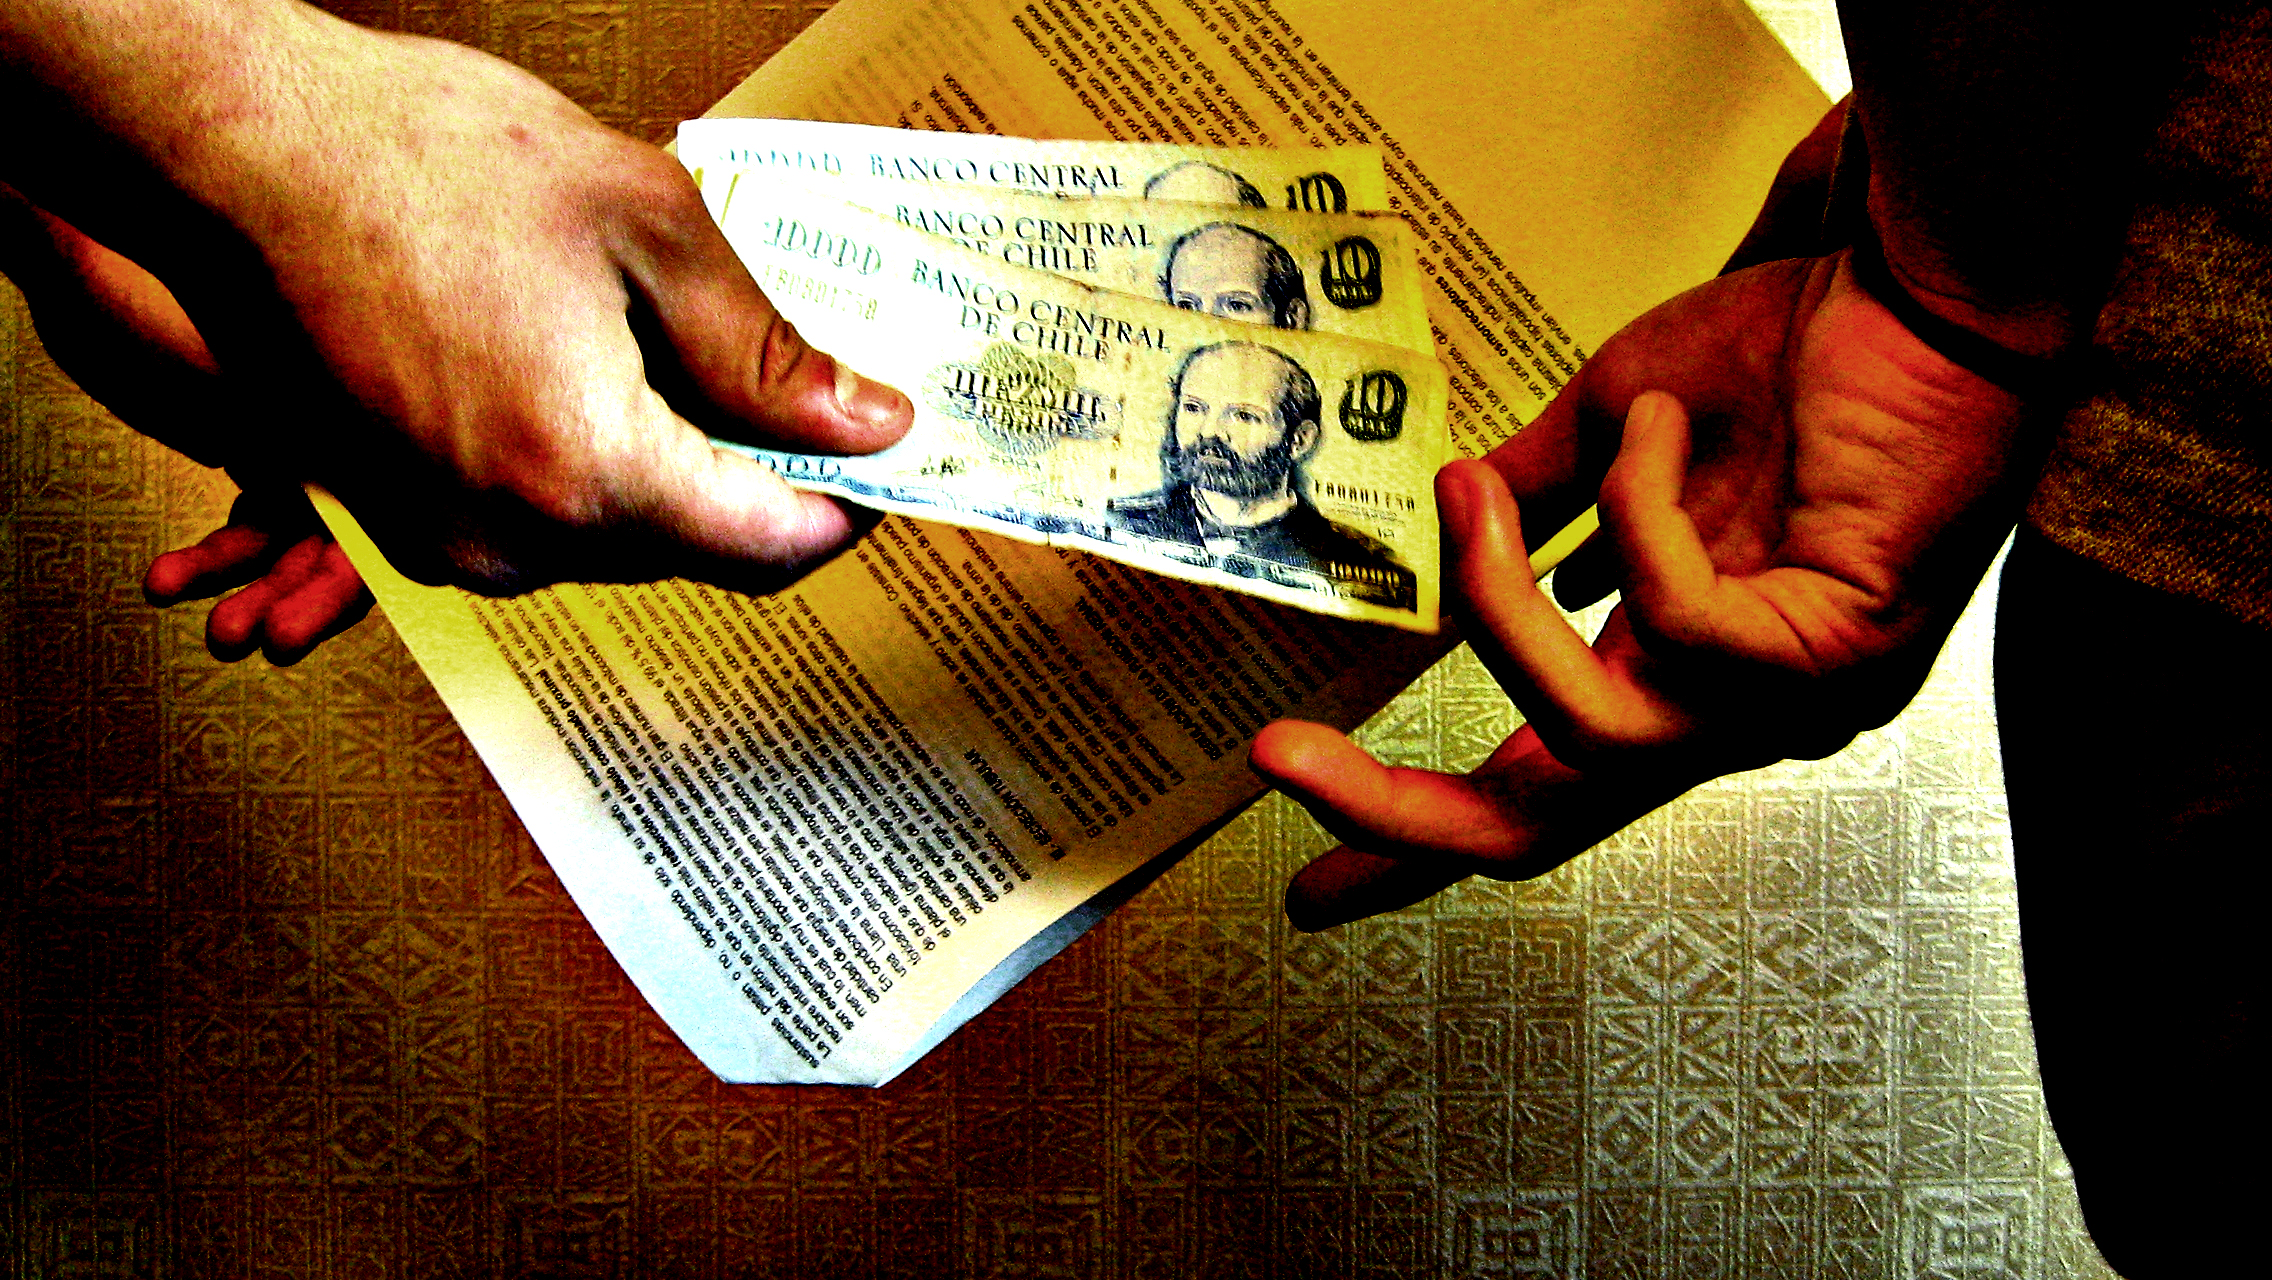 The Catholic Church Struggles To Combat Corruption In Latin America Political Theology Network